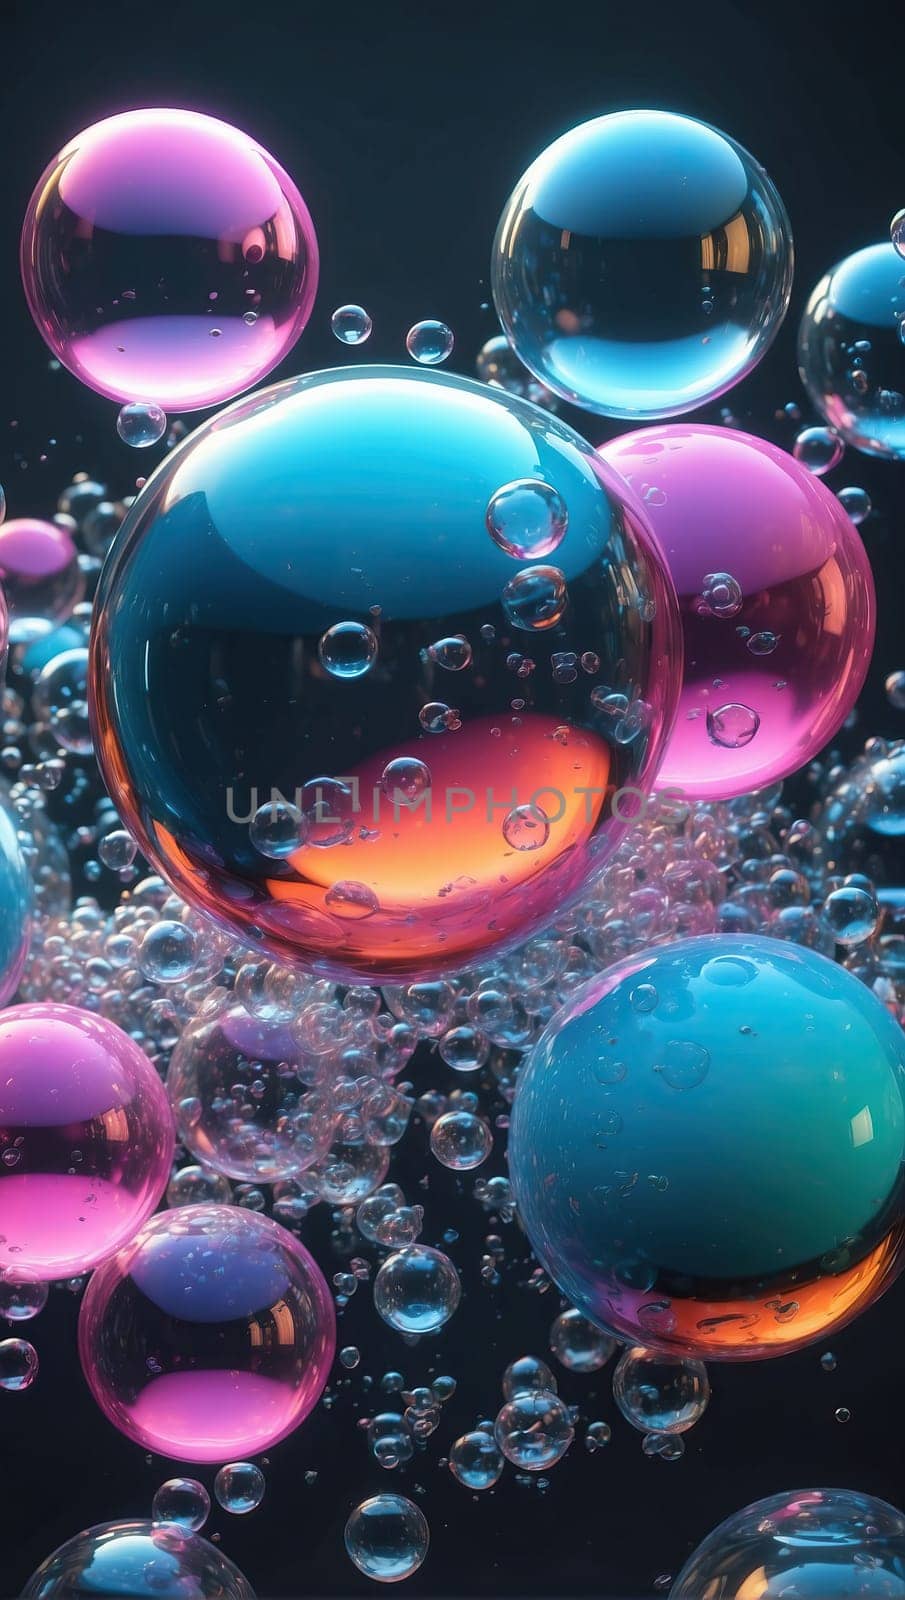 Colored air bubbles by applesstock